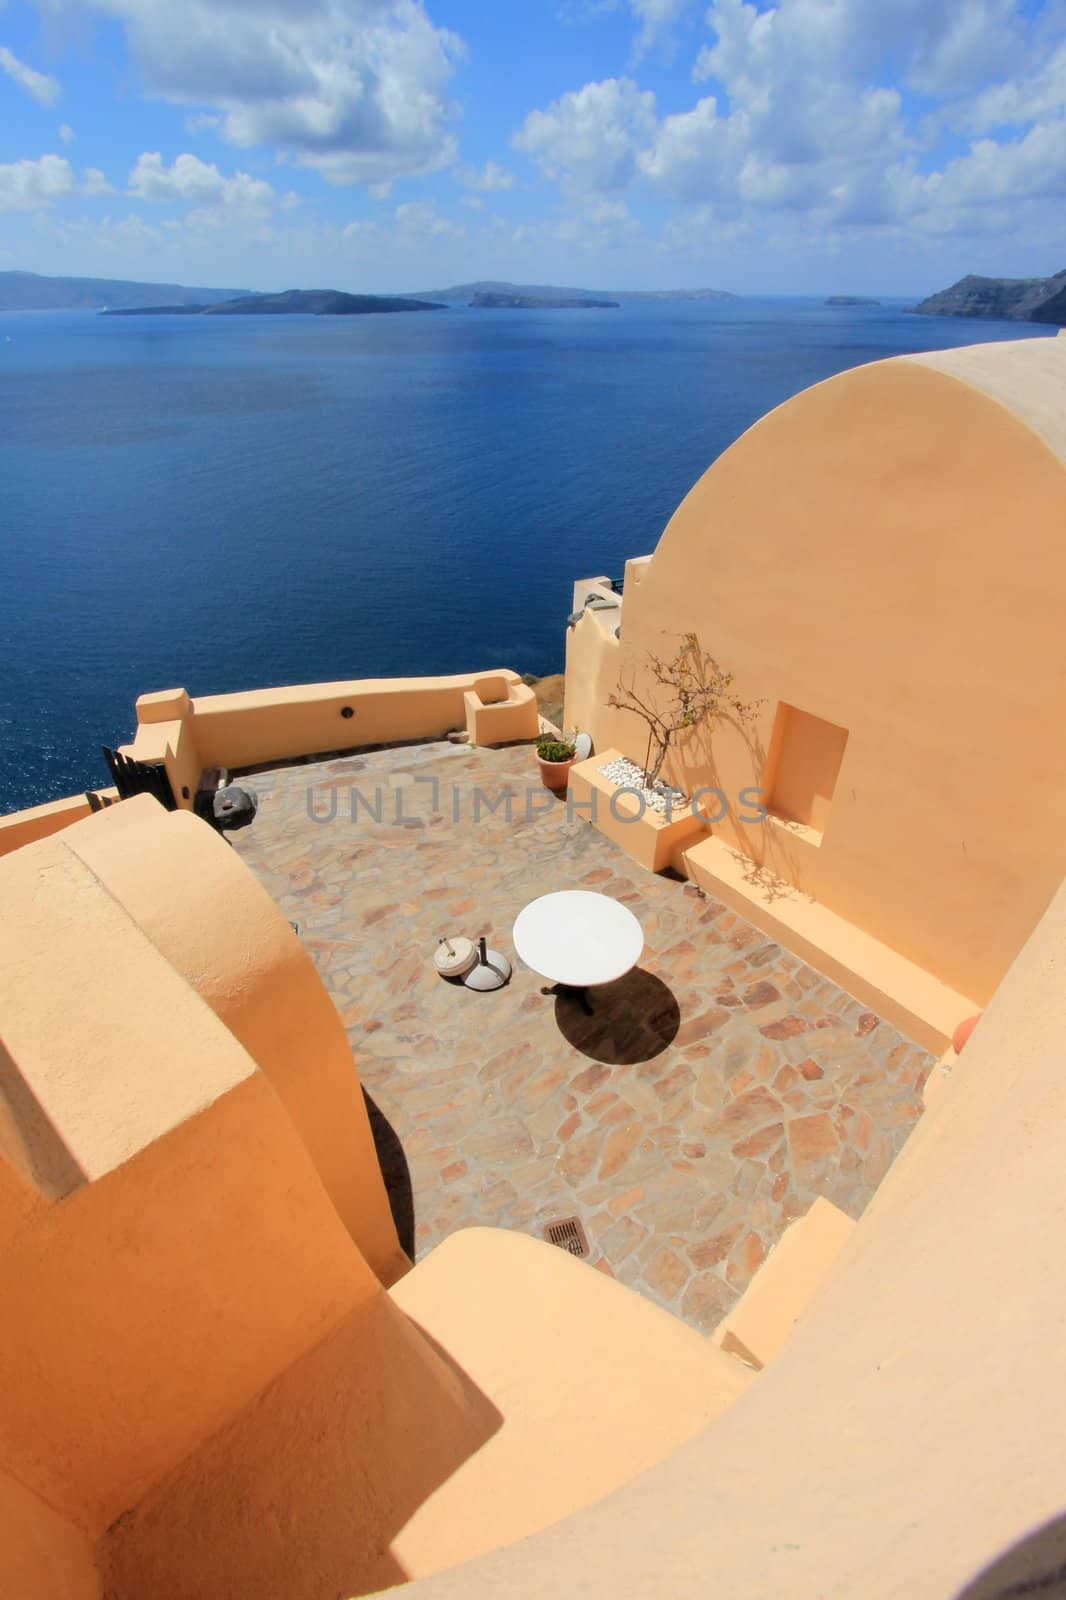 View on the mediterranean sea from the balcony of an orange house at Oia, Santorini, Greece, by beautiful weather